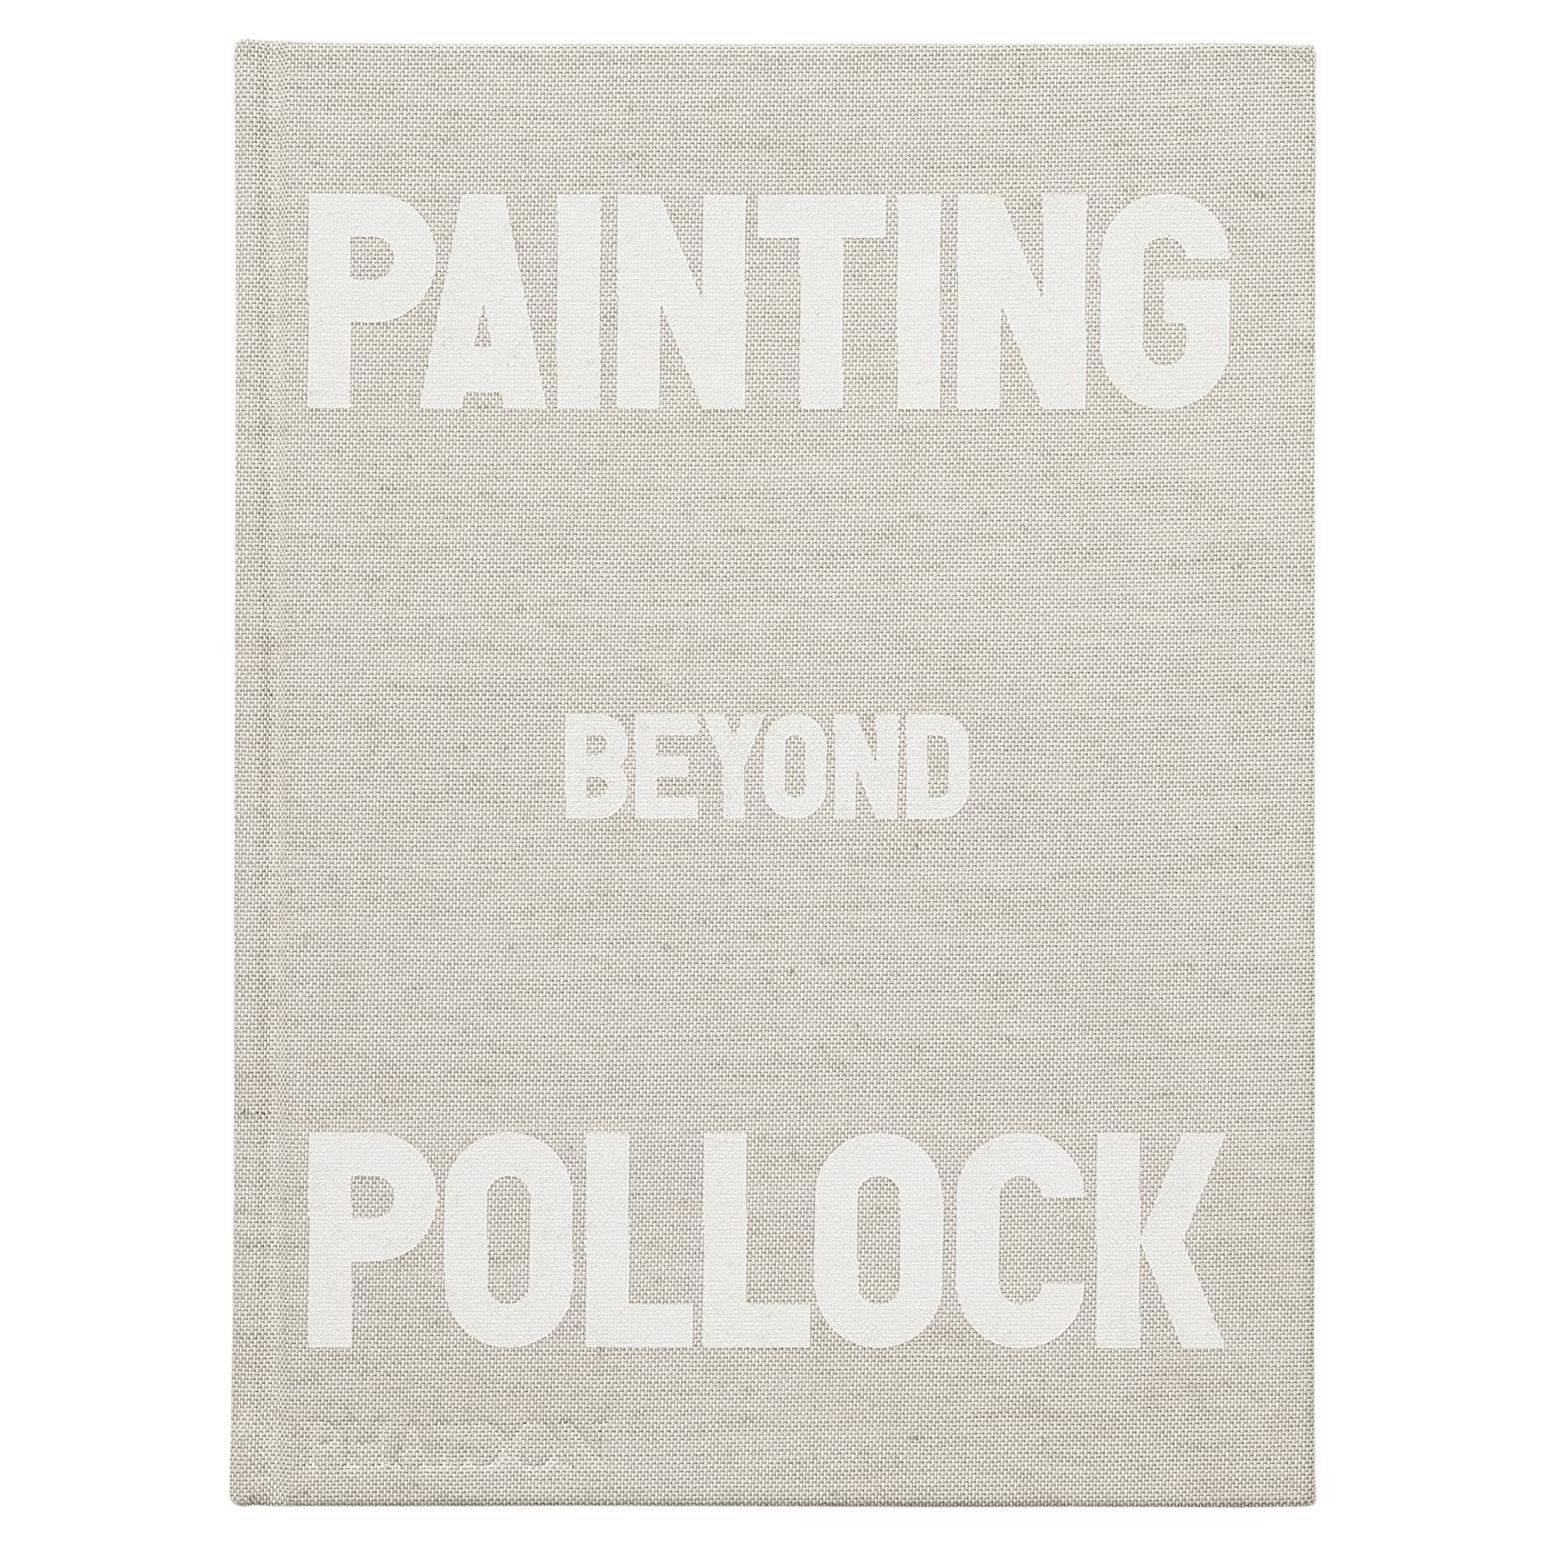 In Stock in Los Angeles, Painting Beyond Pollock by Morgan Falconer